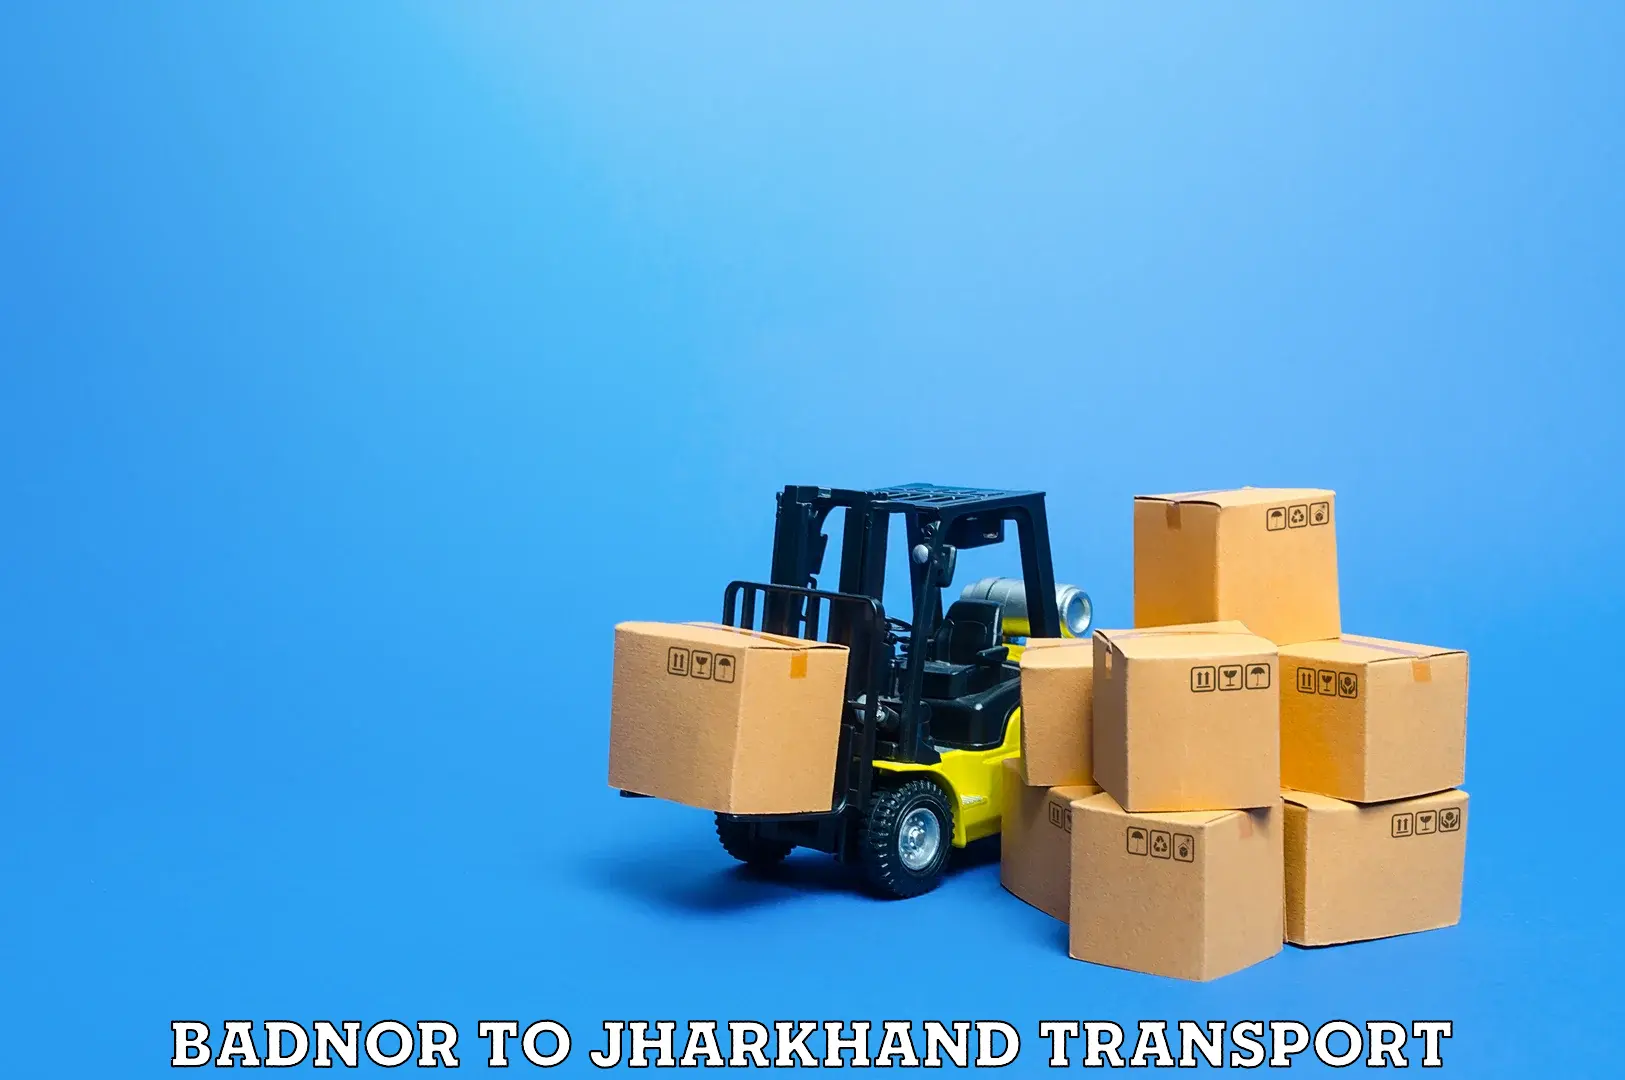 Truck transport companies in India Badnor to Latehar